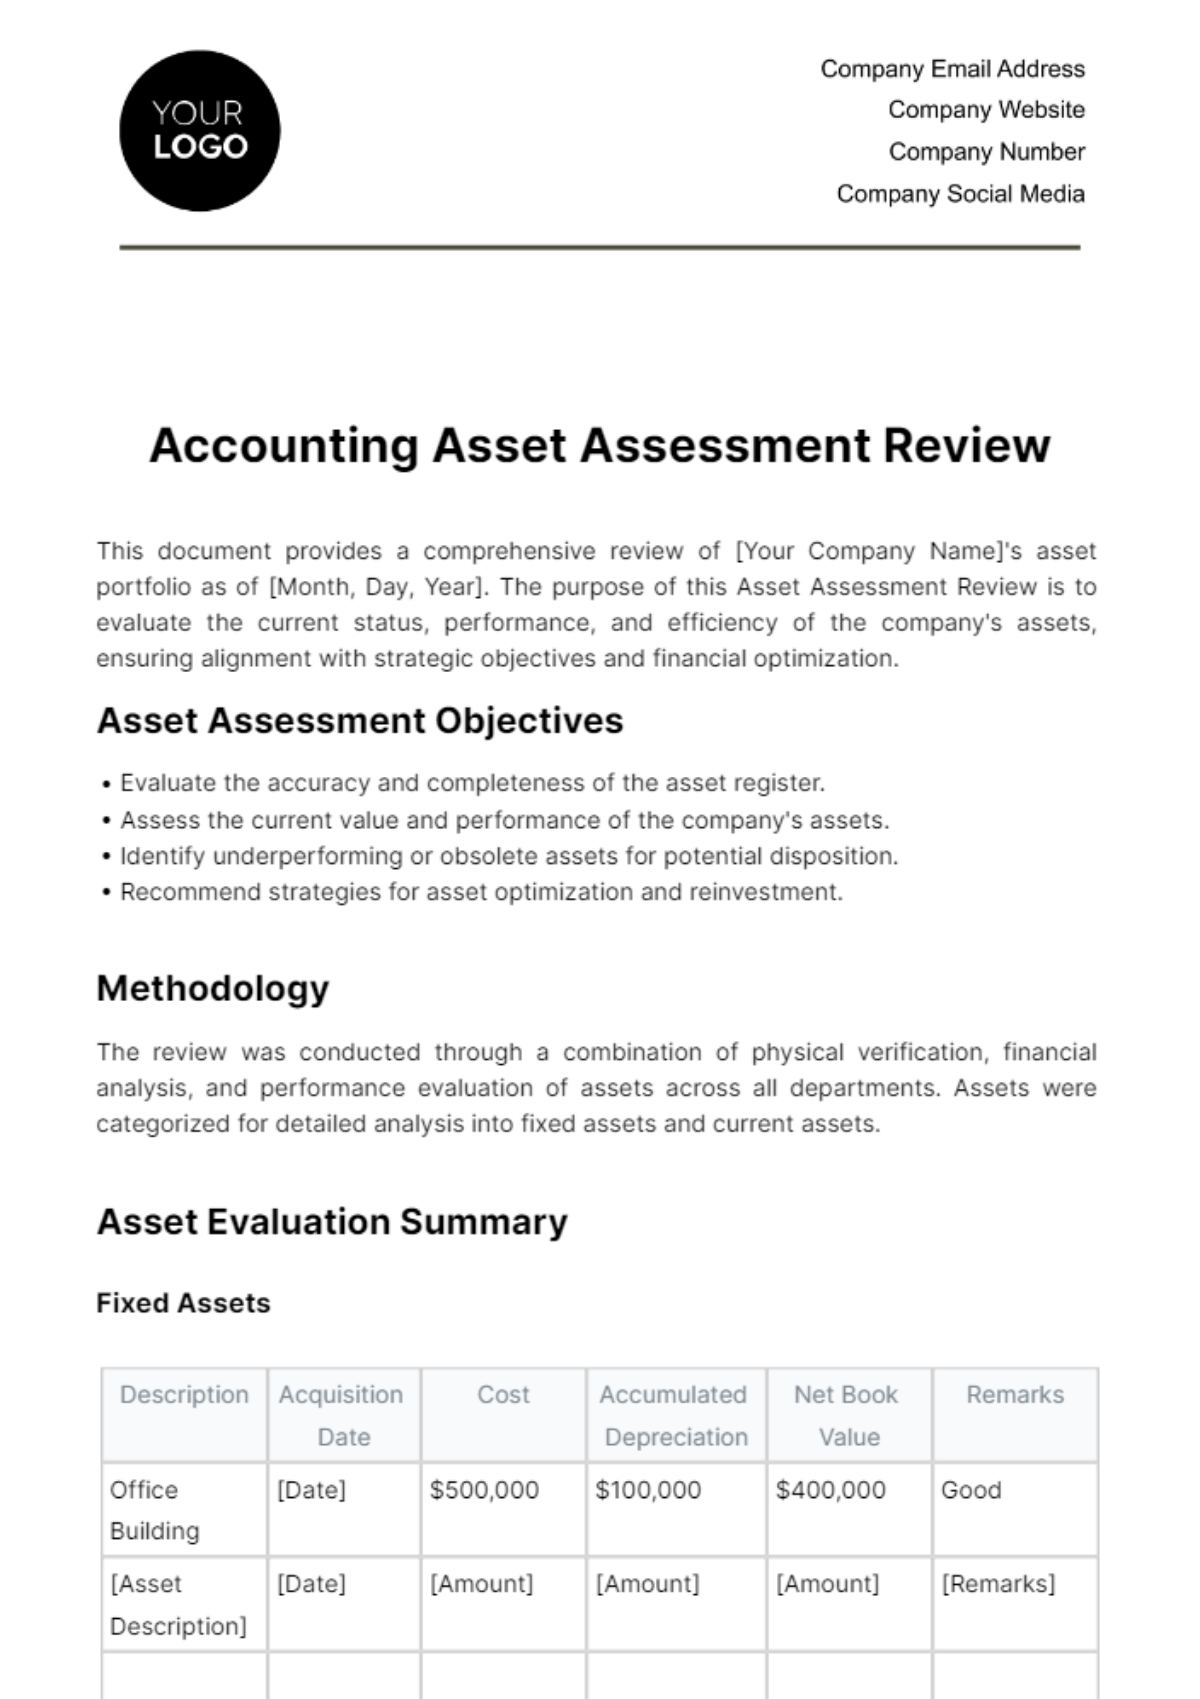 Accounting Asset Assessment Review Template